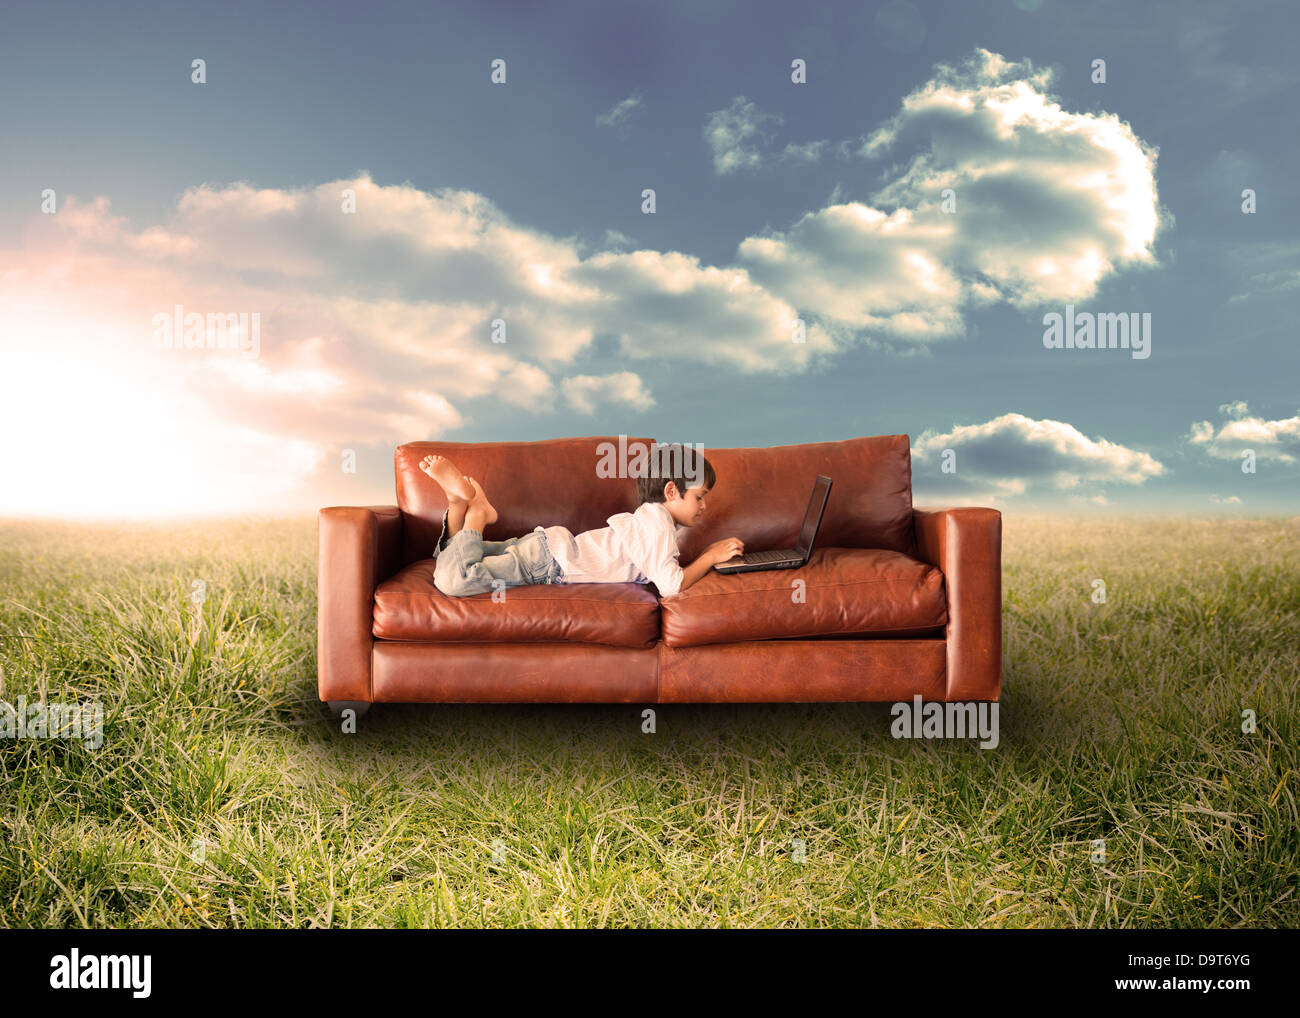 Child using laptop on couch in field Stock Photo